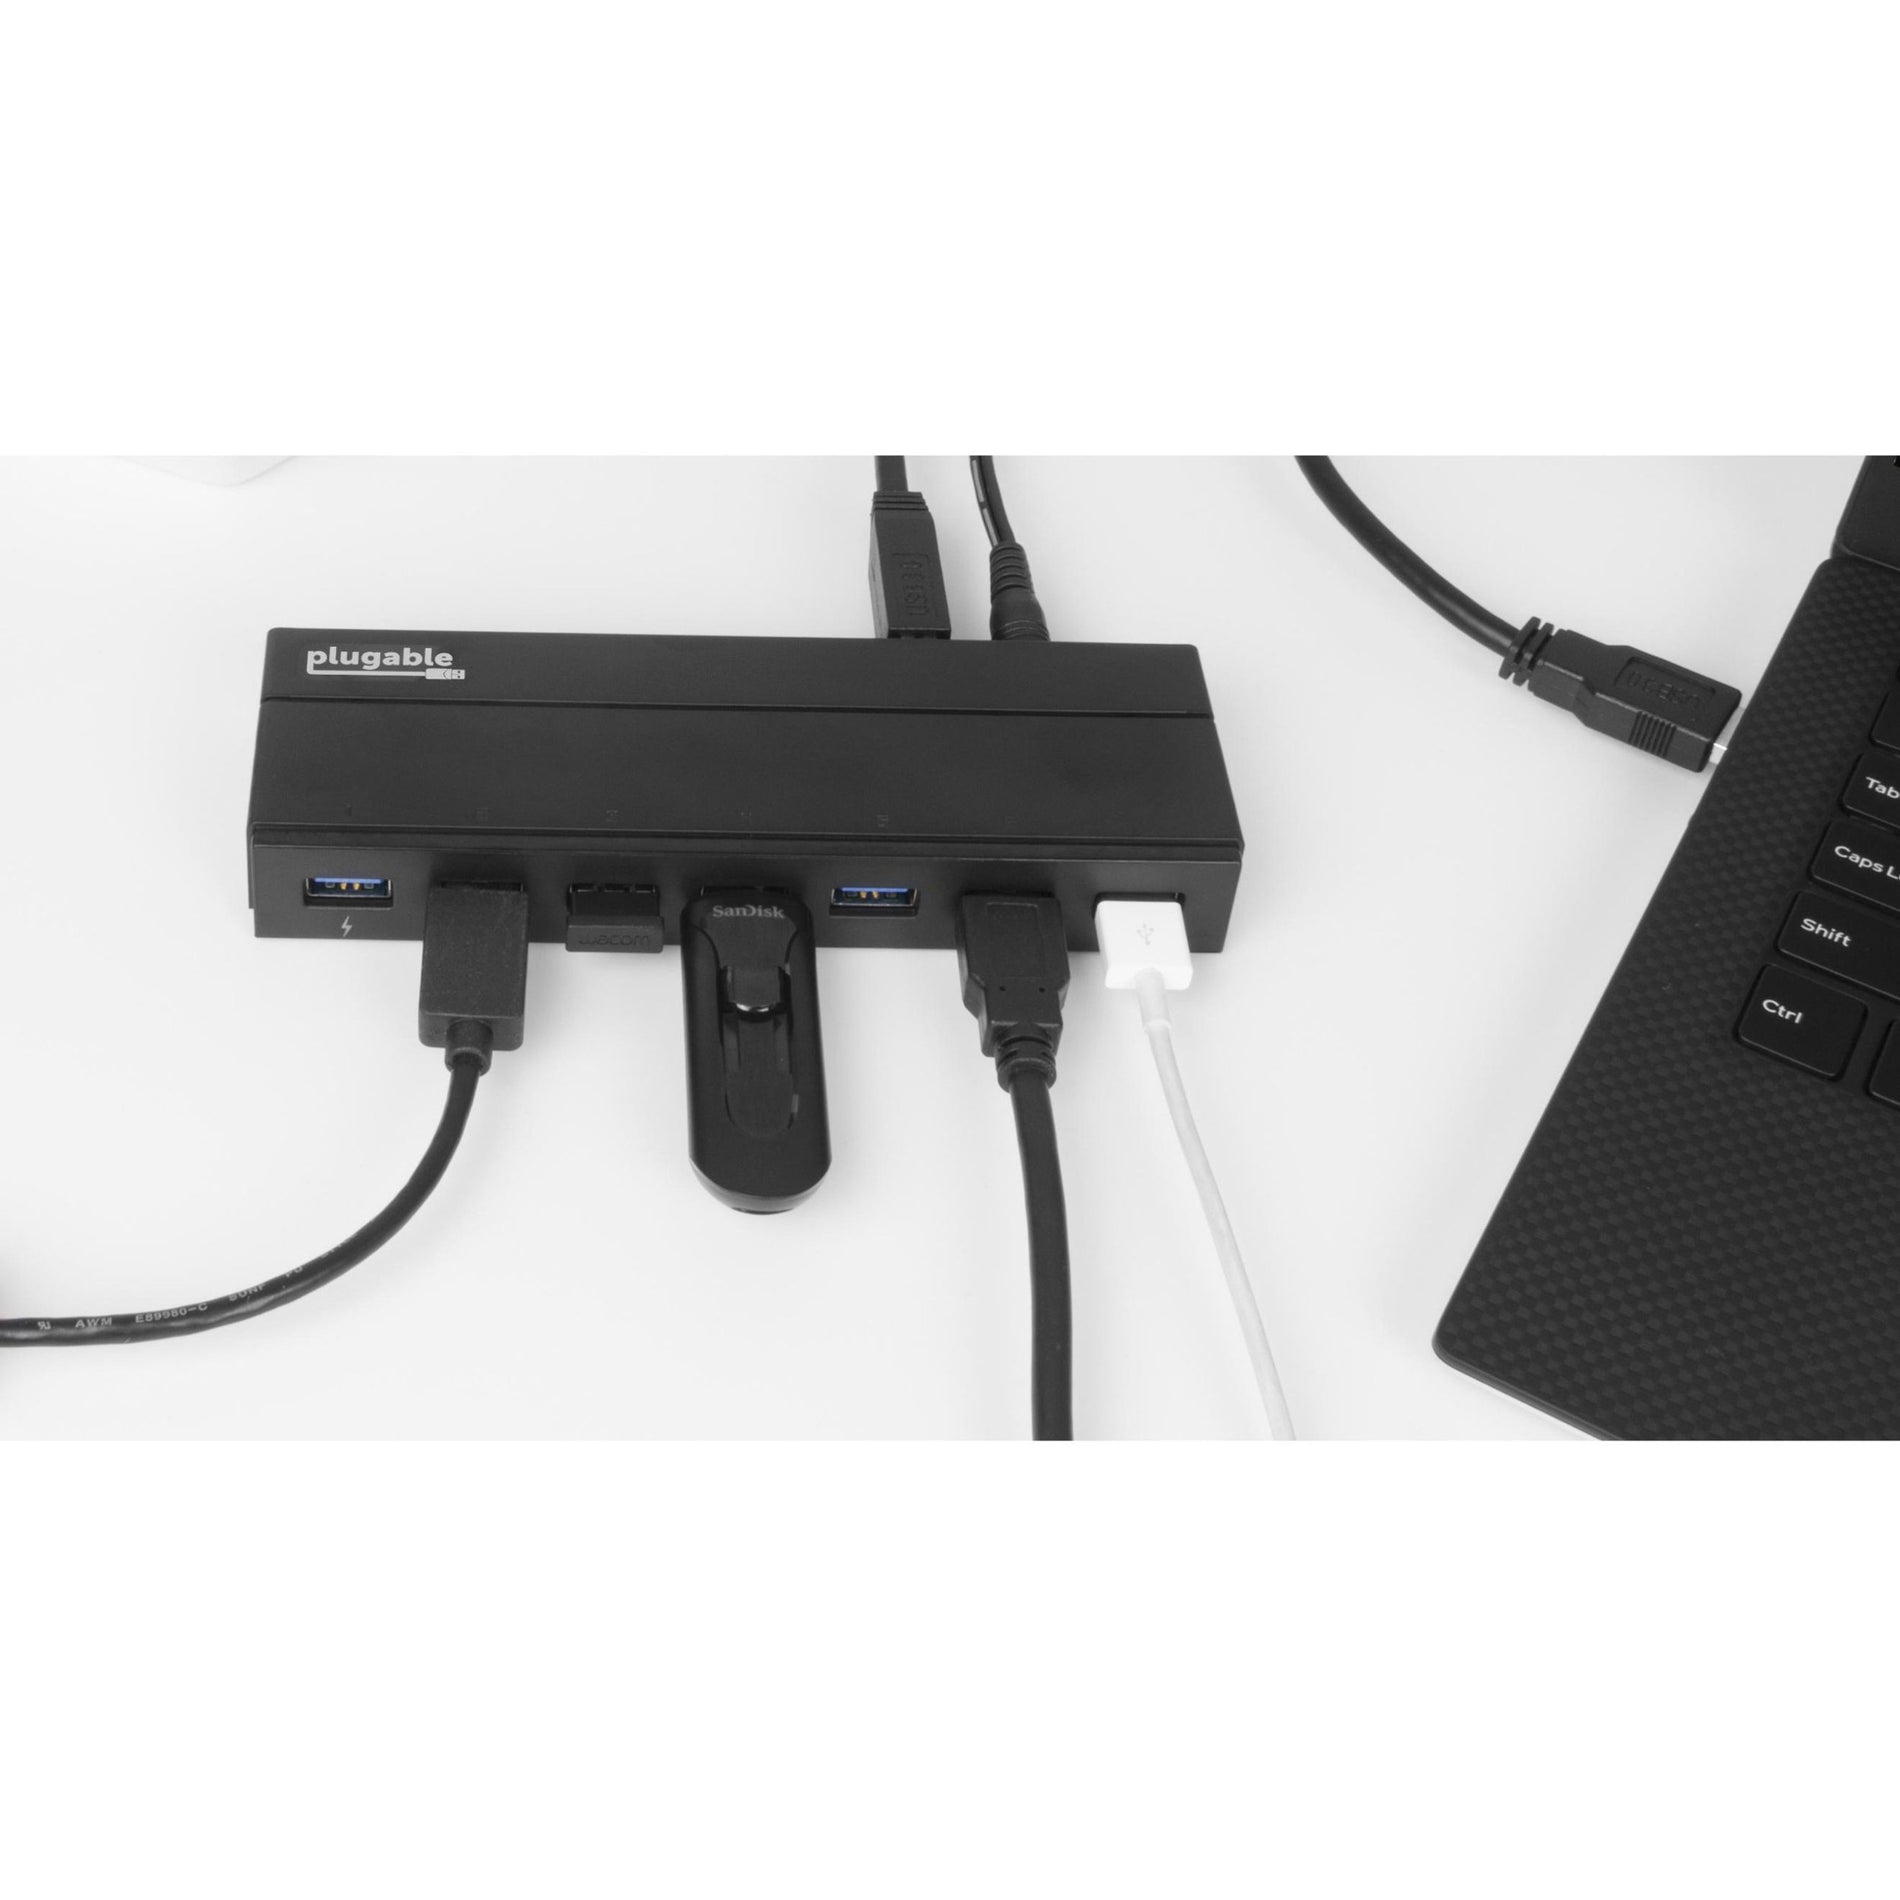 Plugable USB3-HUB7C USB 3.0 7-Port Hub with 36W Power Adapter, Expand Your USB Connectivity